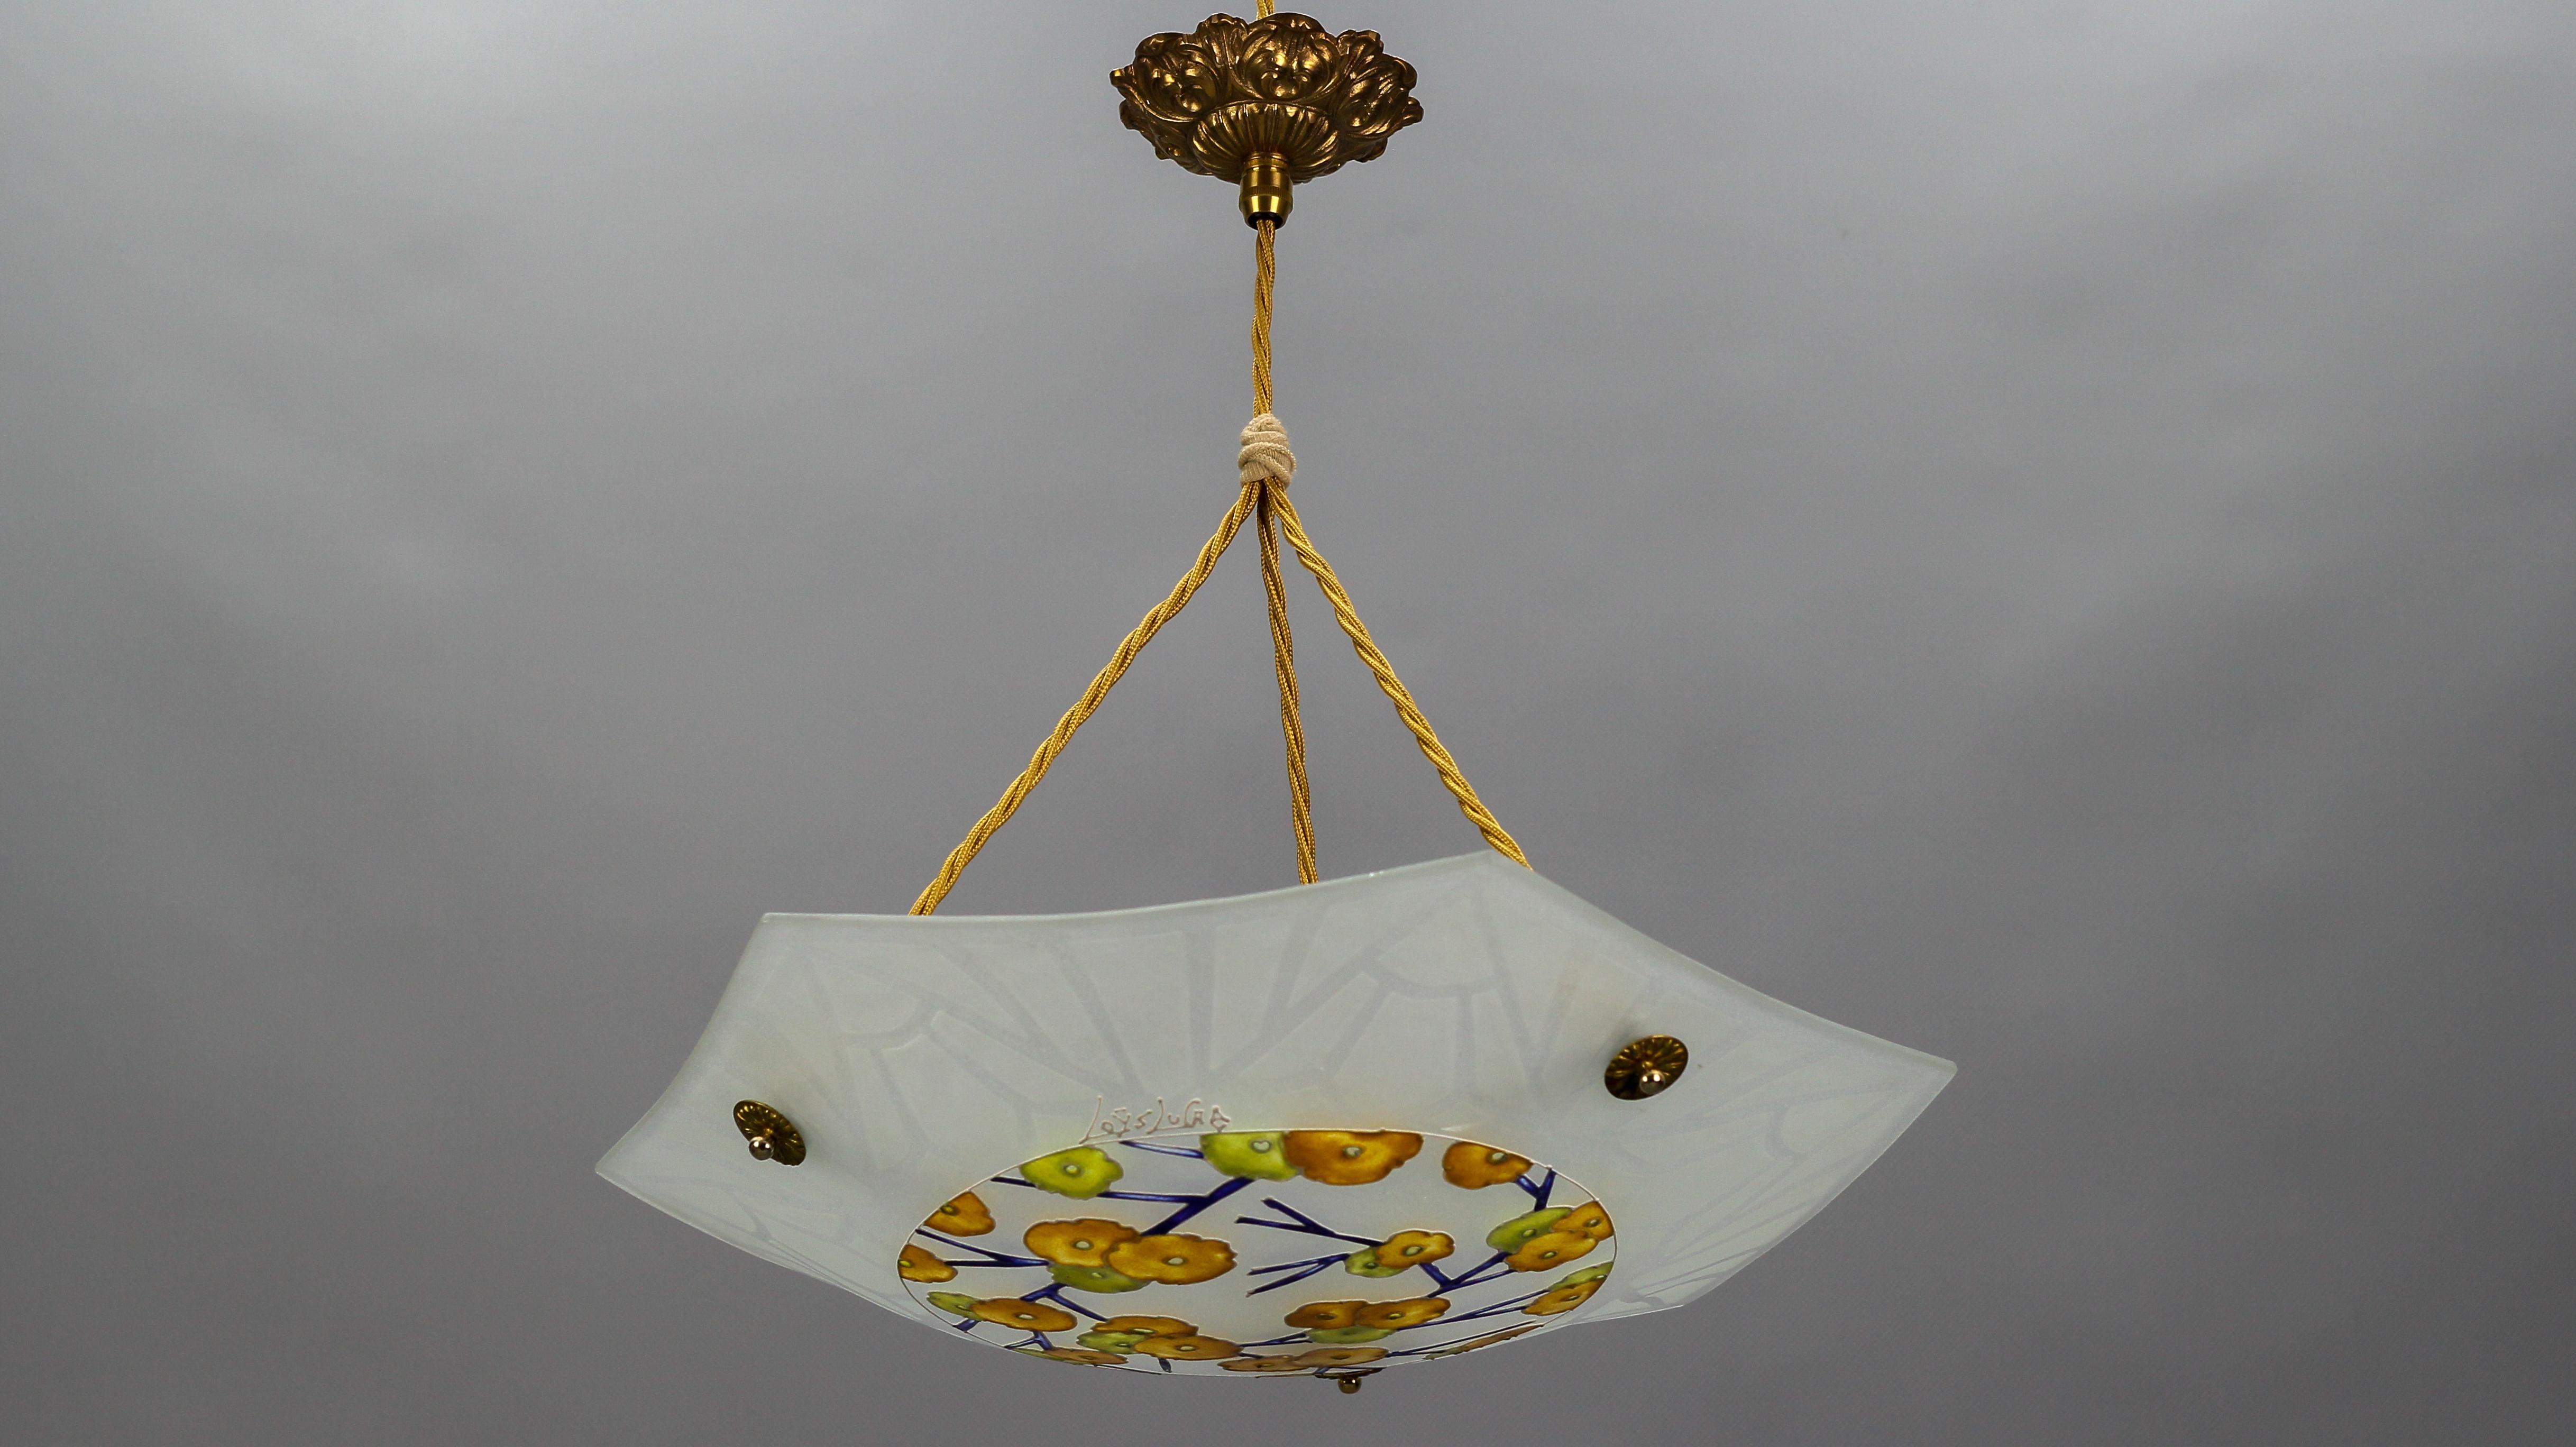 This beautiful Art Deco molded, frosted, and enamel-painted glass ceiling light features a floral design in yellow, orange, blue, and white colors, signed “Loys Lucha”. Outer edge is decorated with a geometric design. The colorful pendant light is